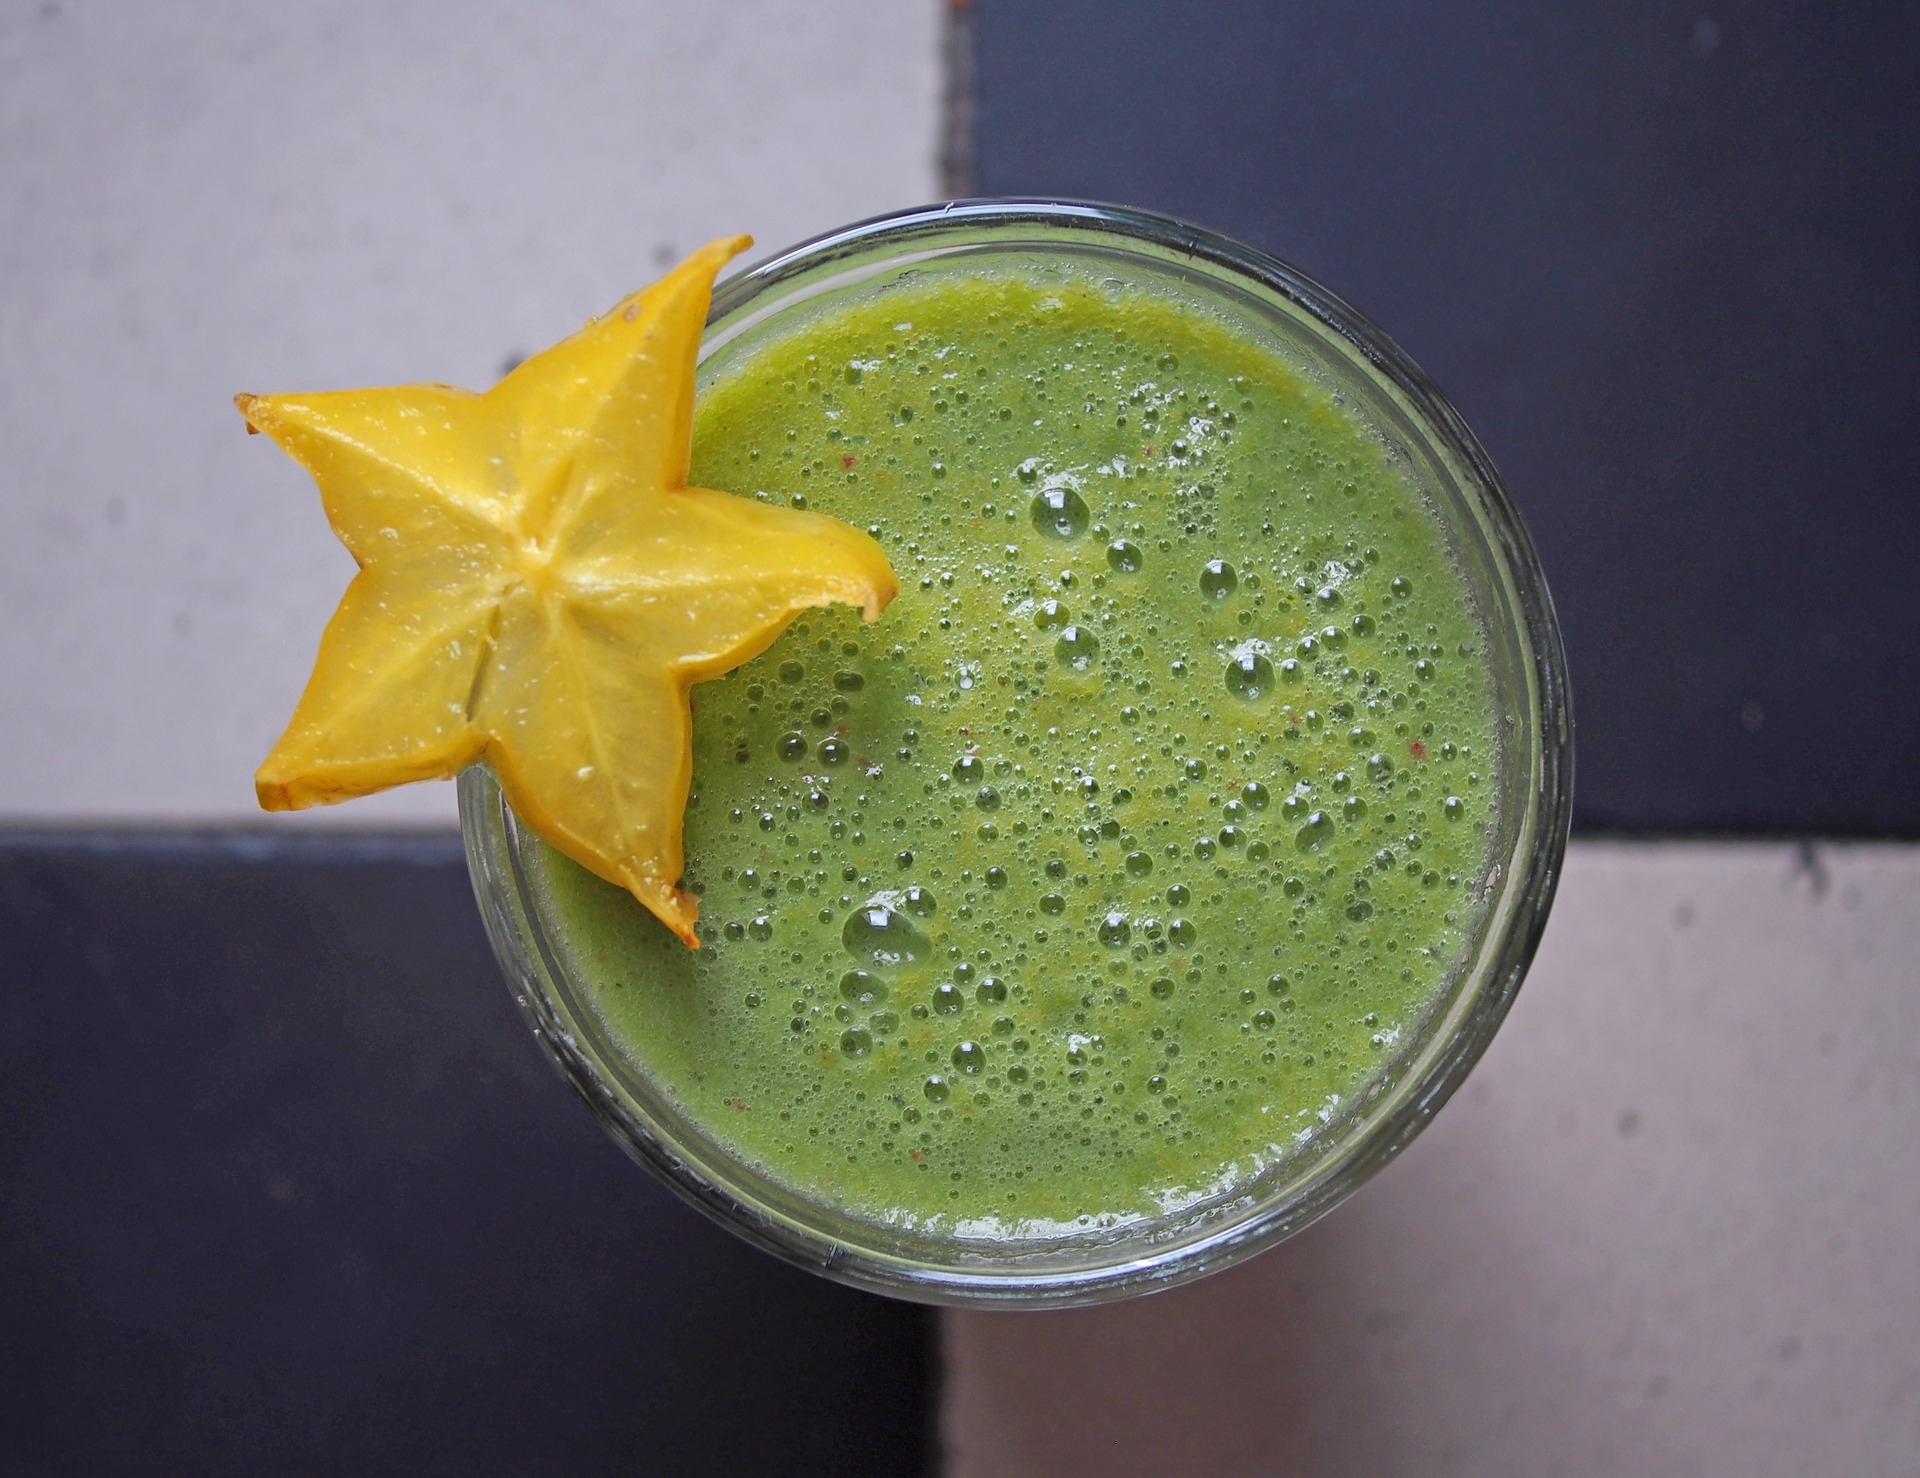 You can add star fruit to juices or smoothies